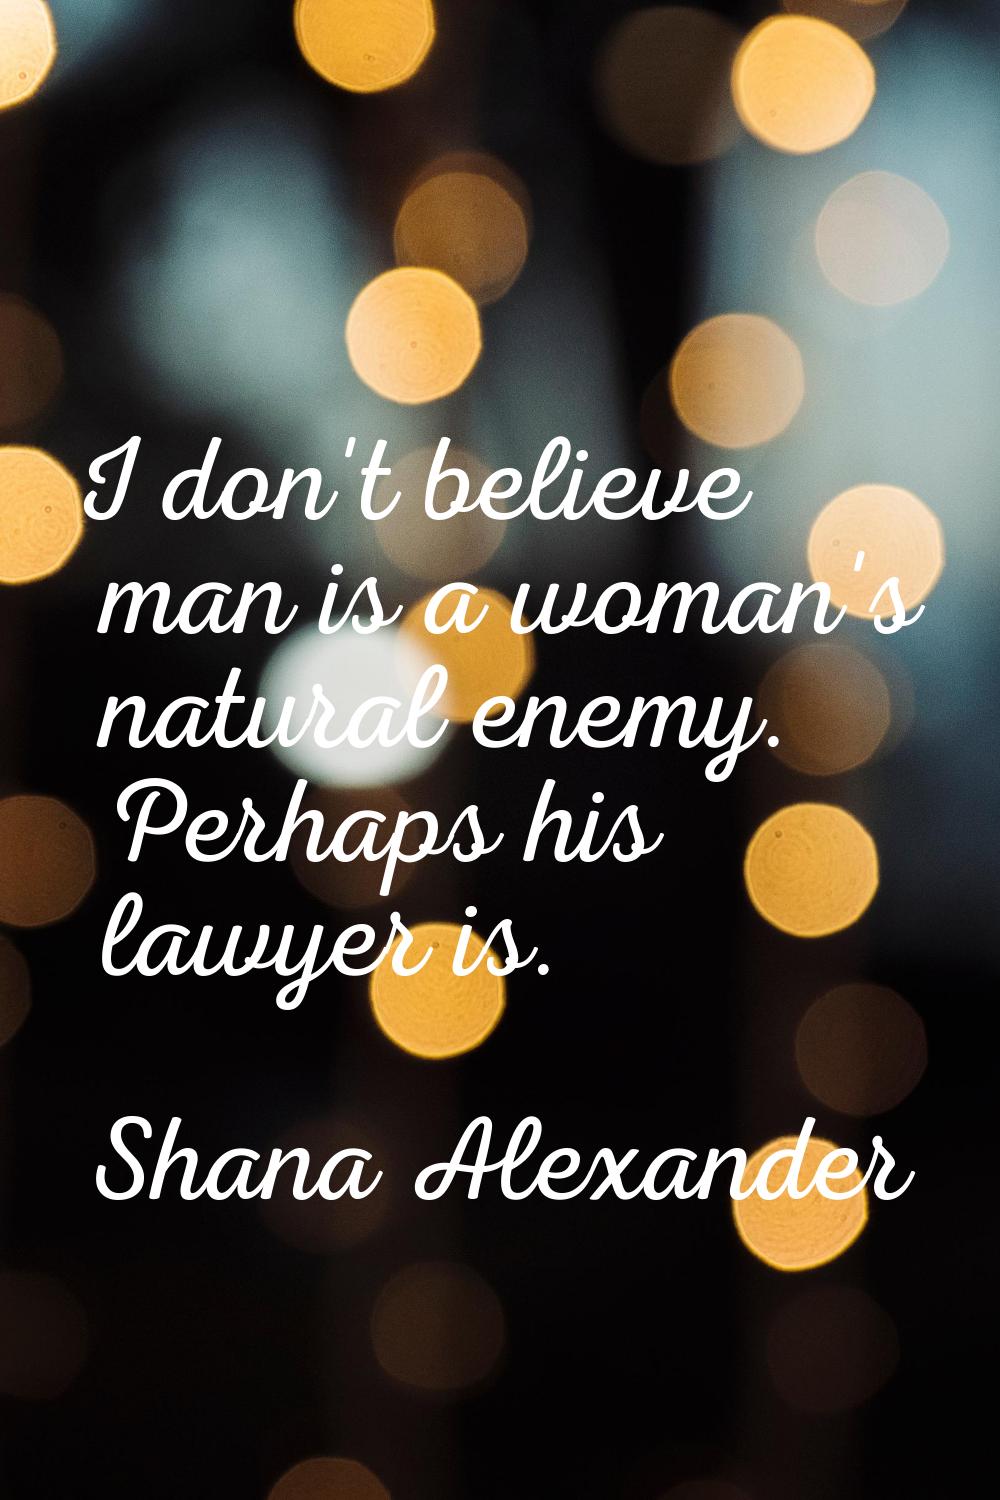 I don't believe man is a woman's natural enemy. Perhaps his lawyer is.